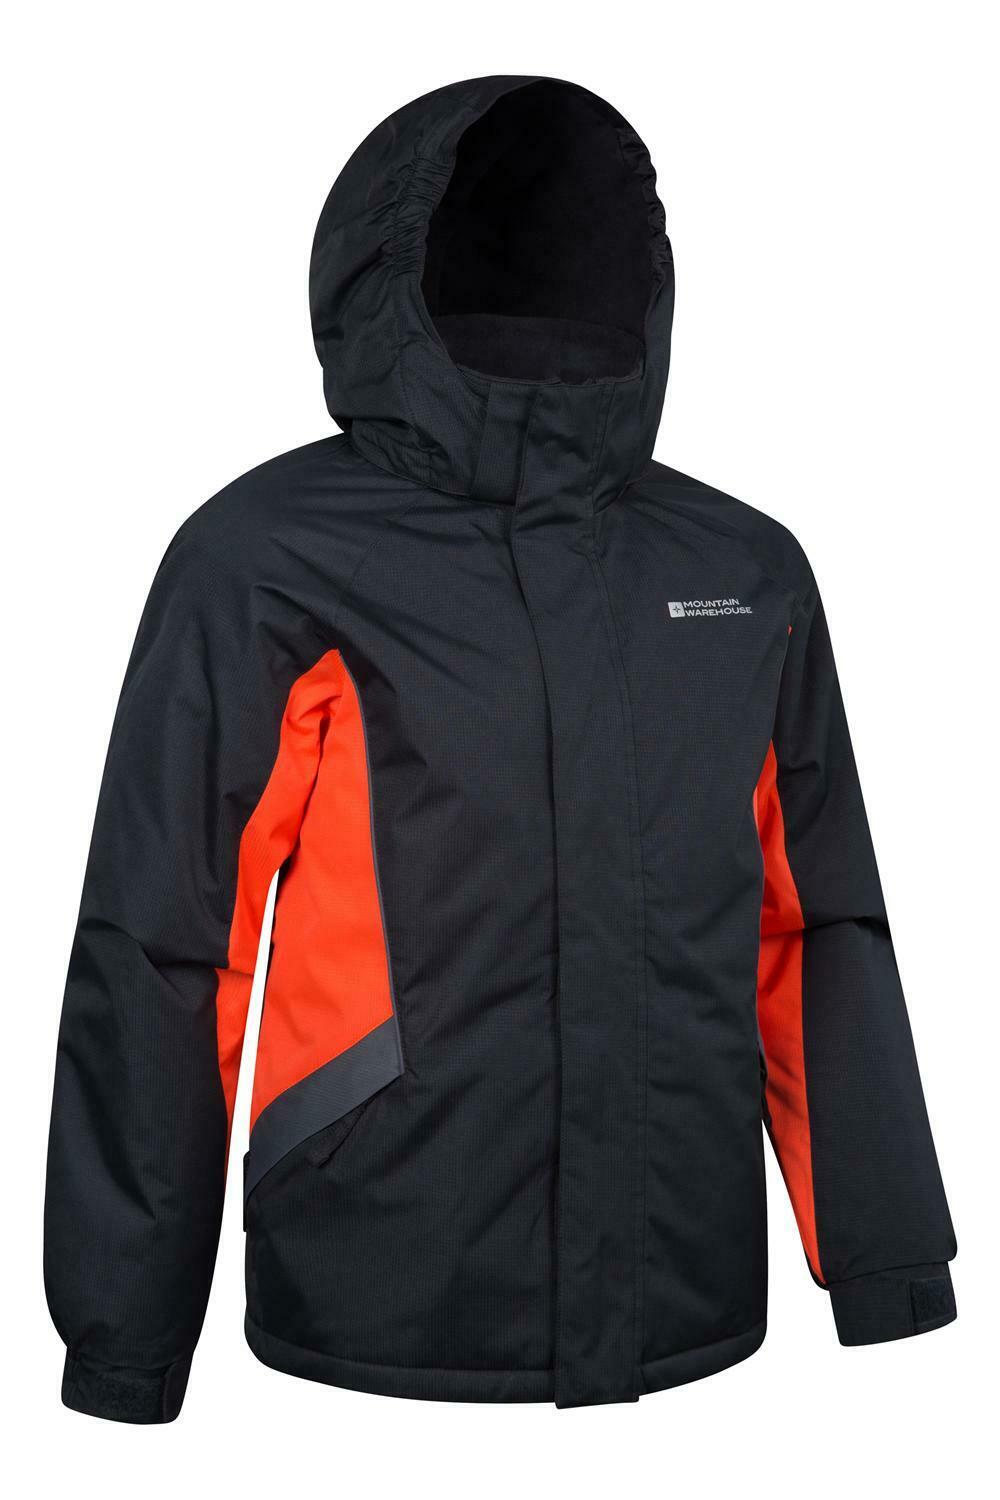 Mountain Warehouse Boys Ski Jacket with Snow proof Fabric and Fleece Lining